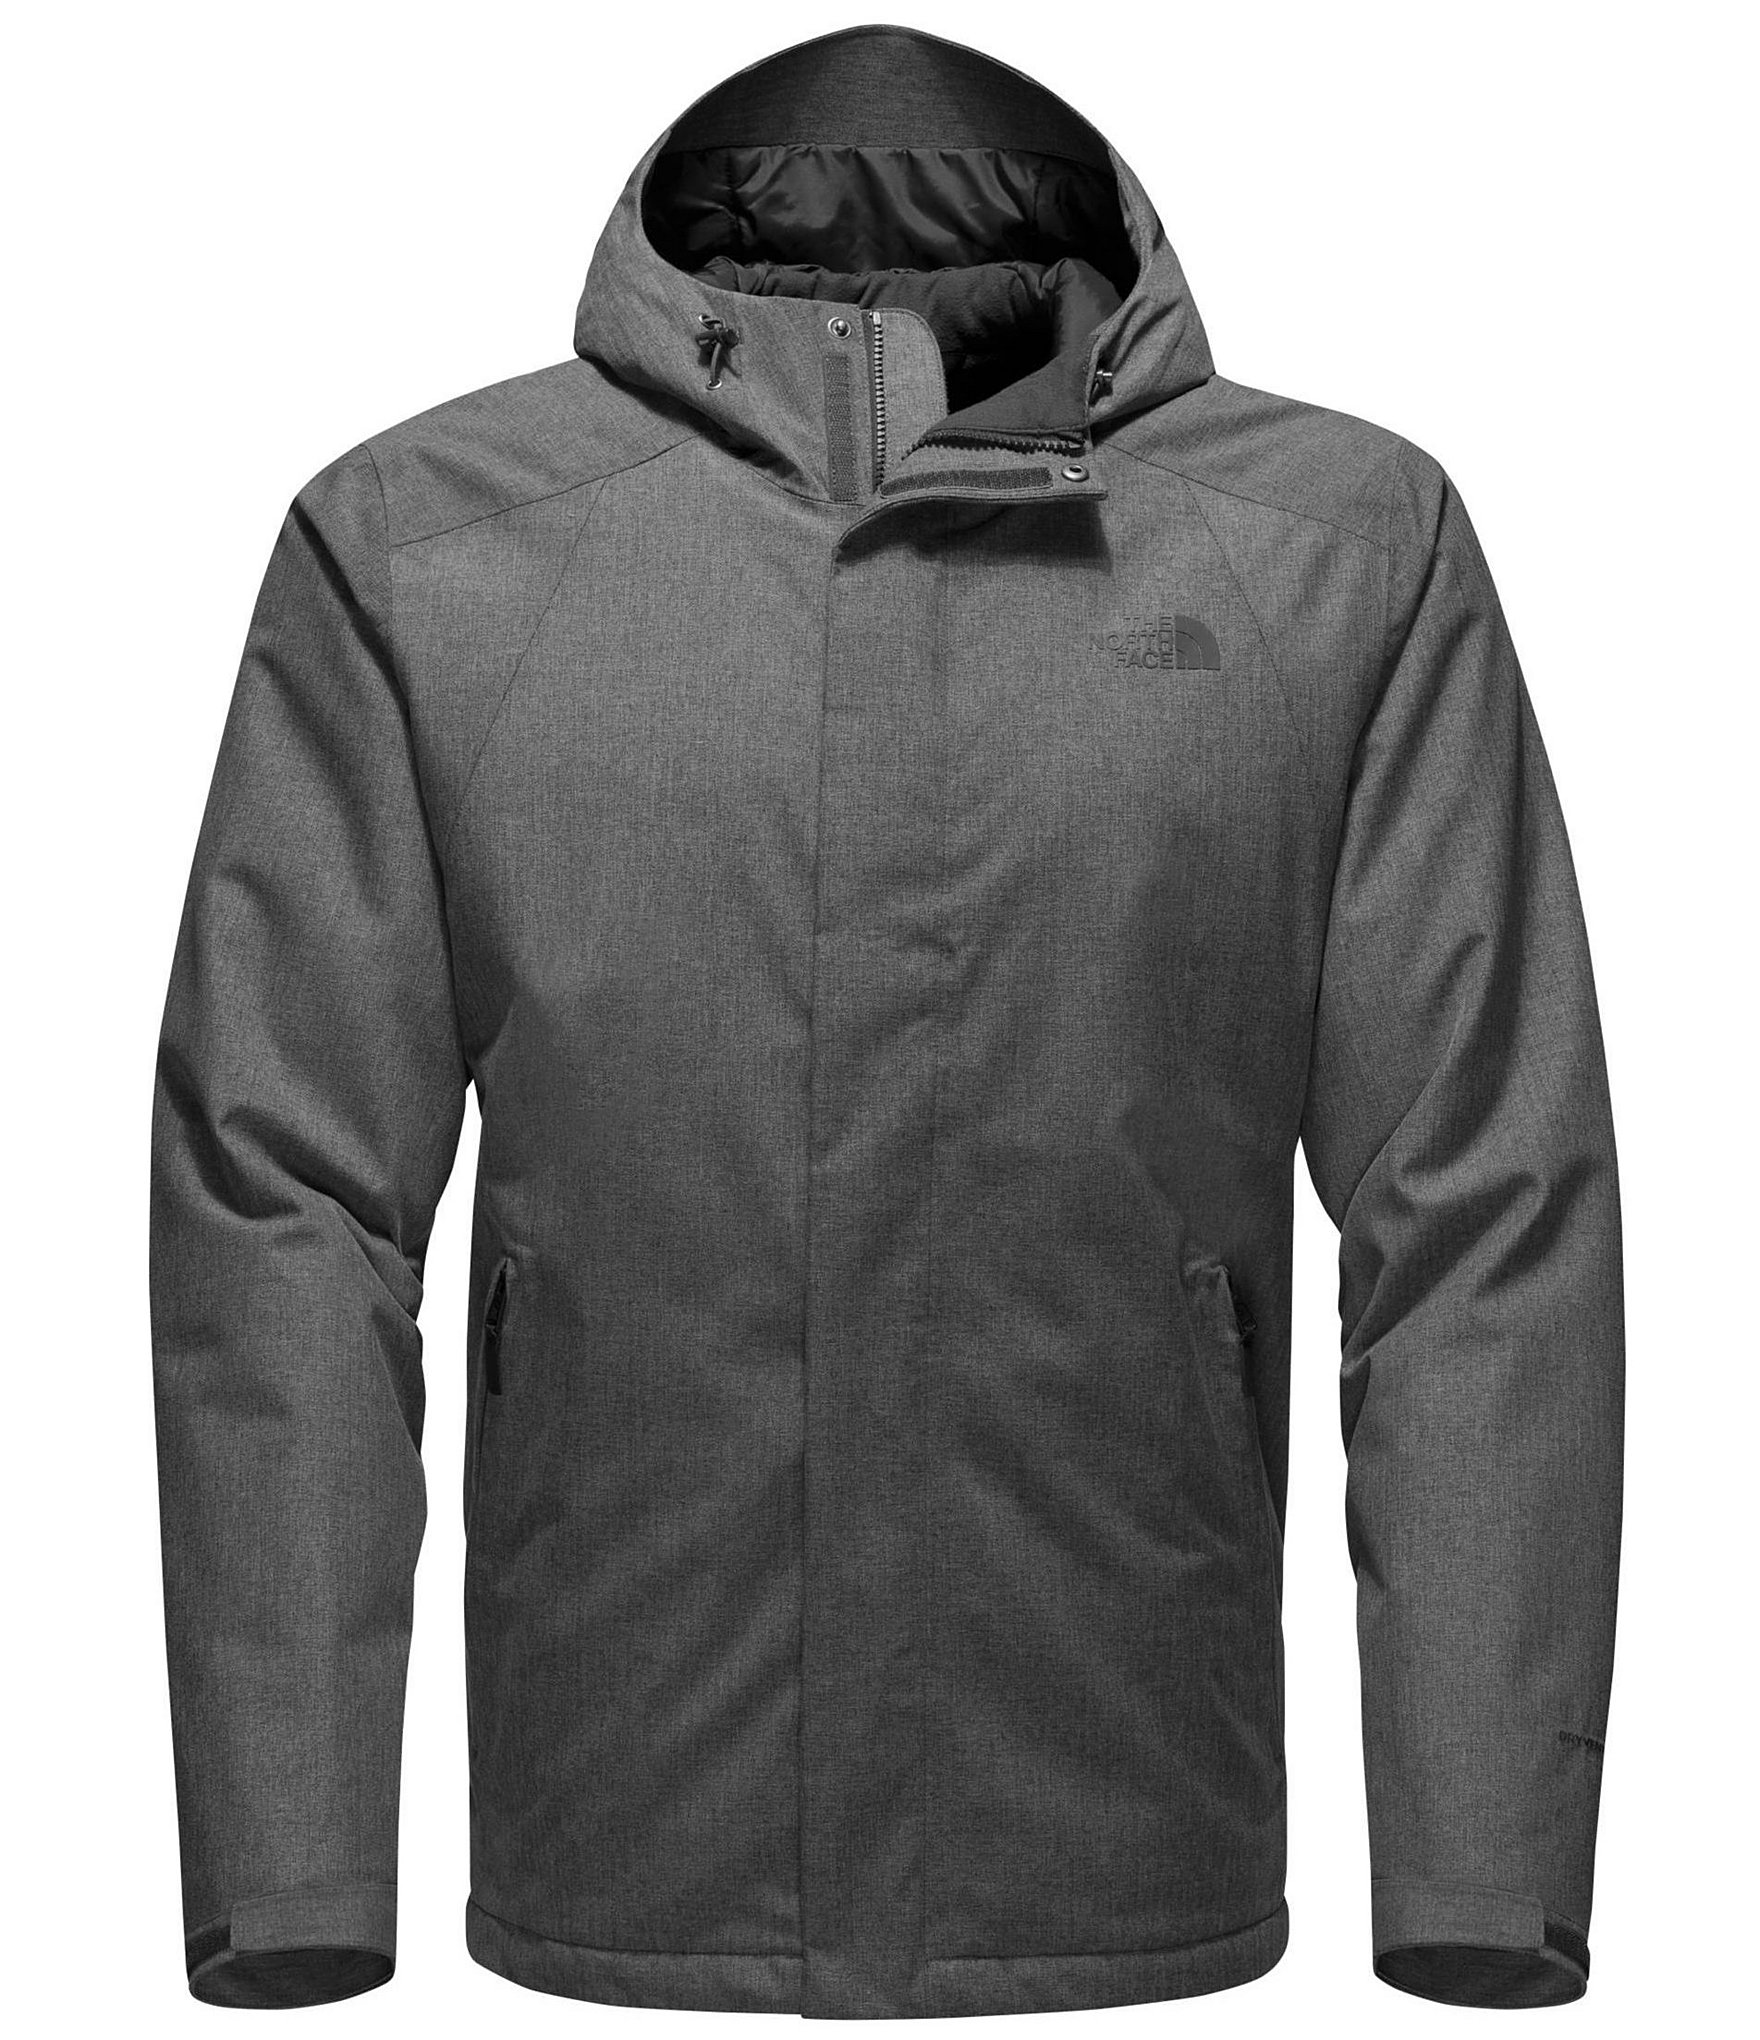 The North Face Inlux Insulated Waterproof Jacket | Dillards